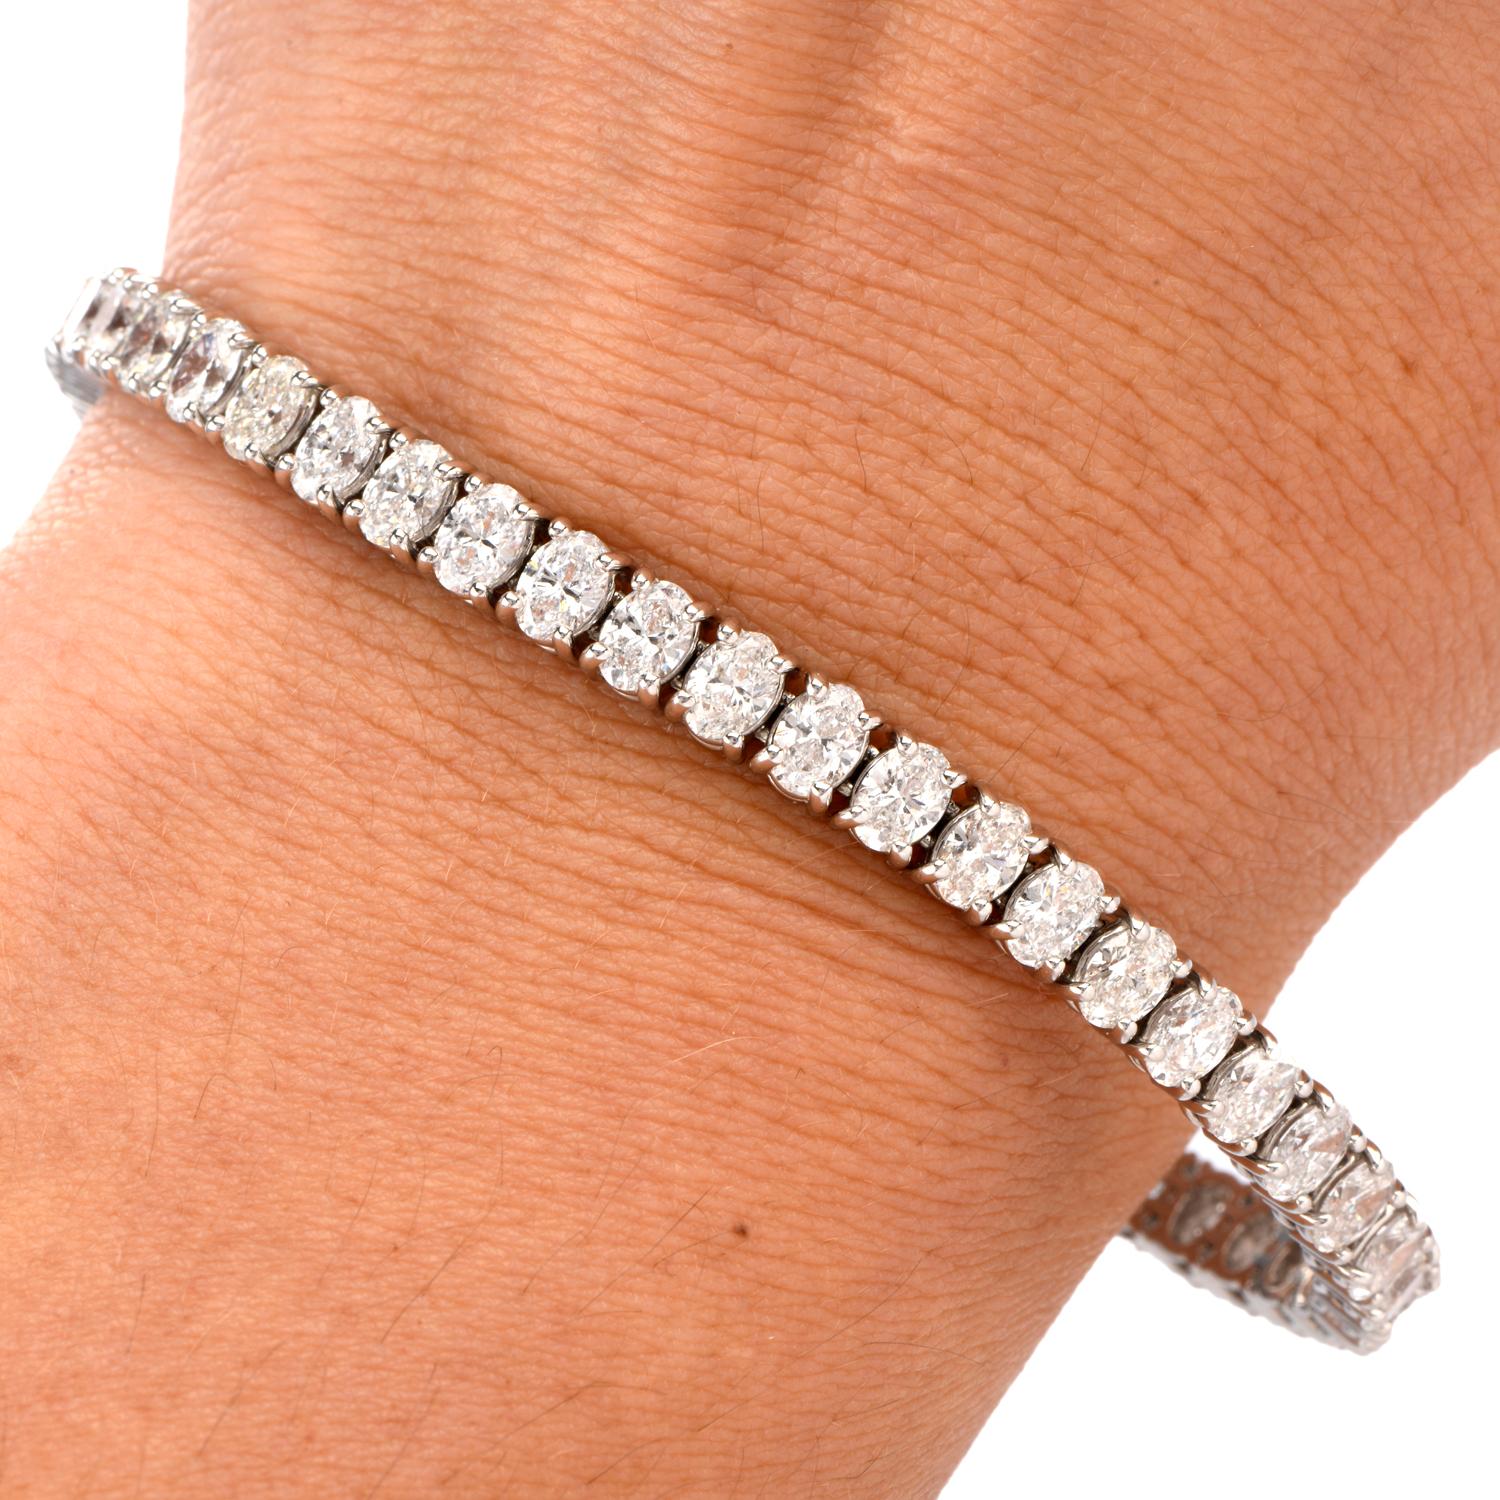 A diamond by any other name.....

This is no ordinary bracelet as it features 49 oval cut faceted Diamonds

running from end to end.

Diamonds weigh collectively appx. 9.43 carats.

Graded as G-H color and VS2-SI1 clarity.

Secured with a hidden